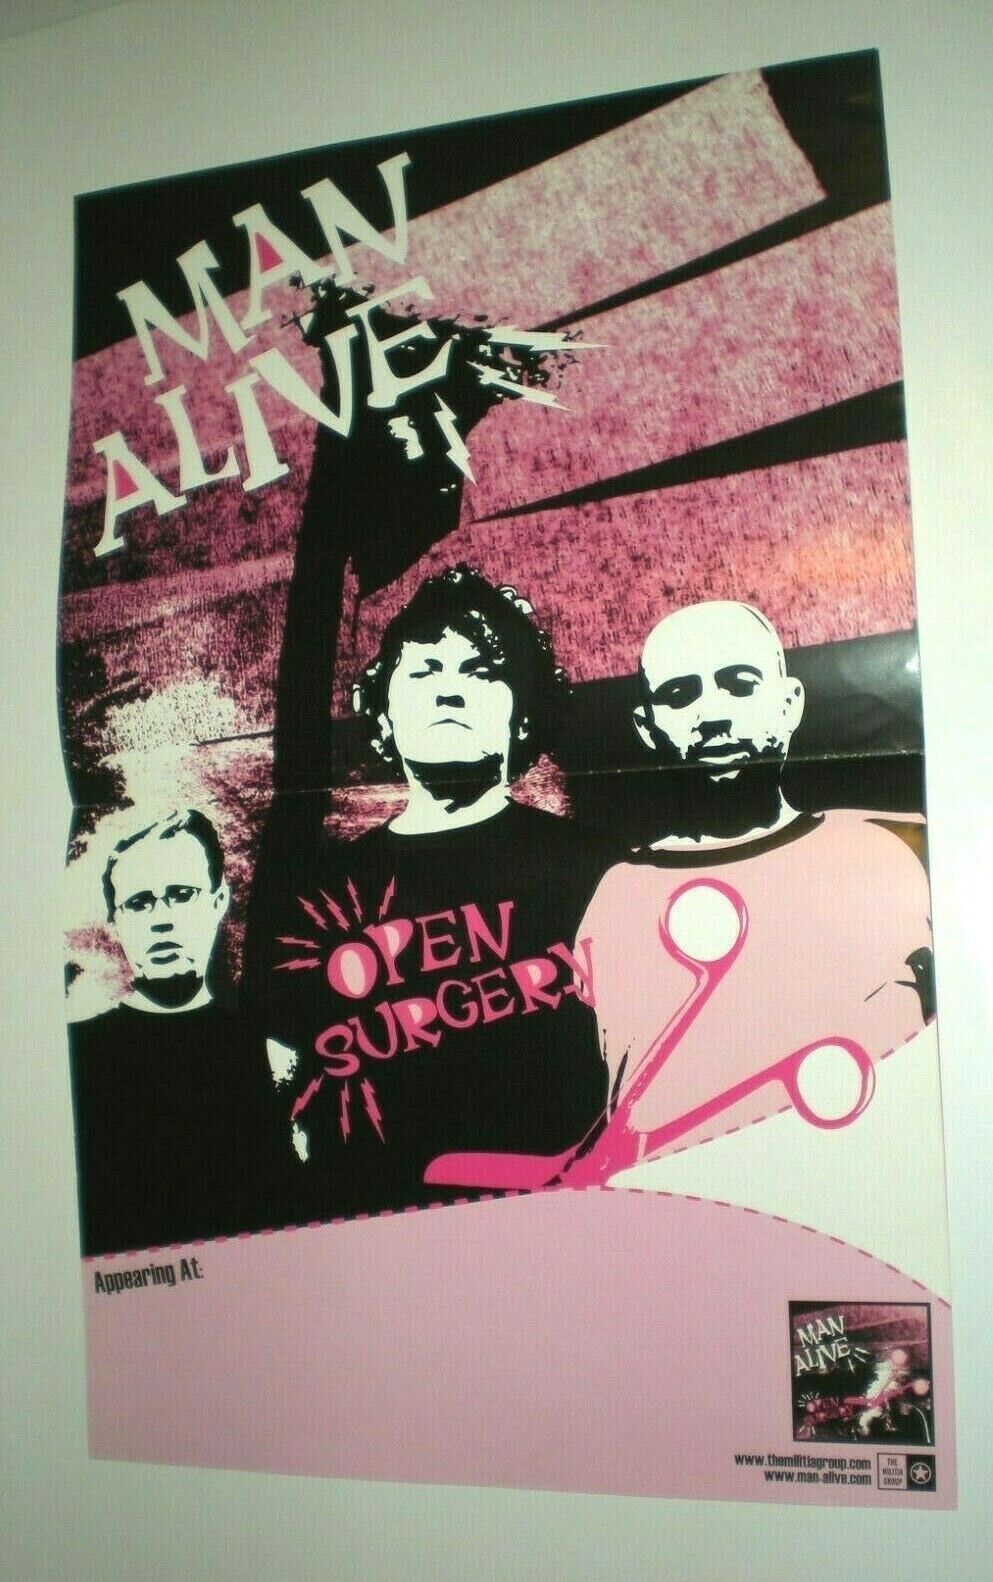 POSTER by MAN ALIVE open surgery Rare Promo For the band album gig show F